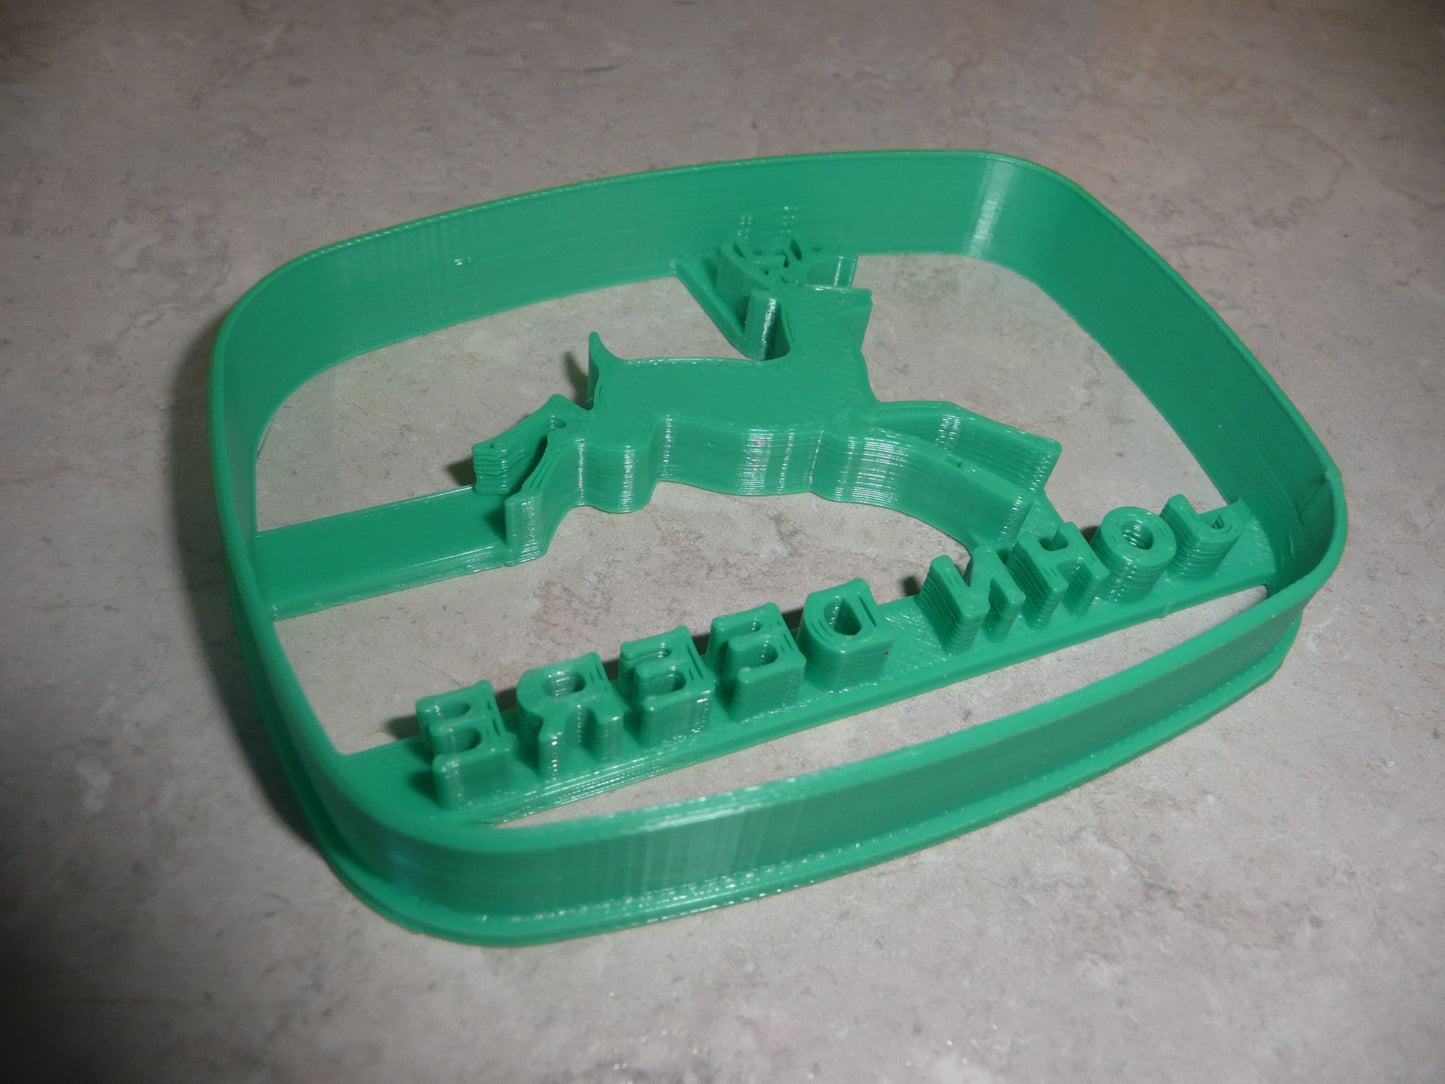 John Deere Vintage Logo With Words Farm Tractor Cookie Cutter USA PR3868